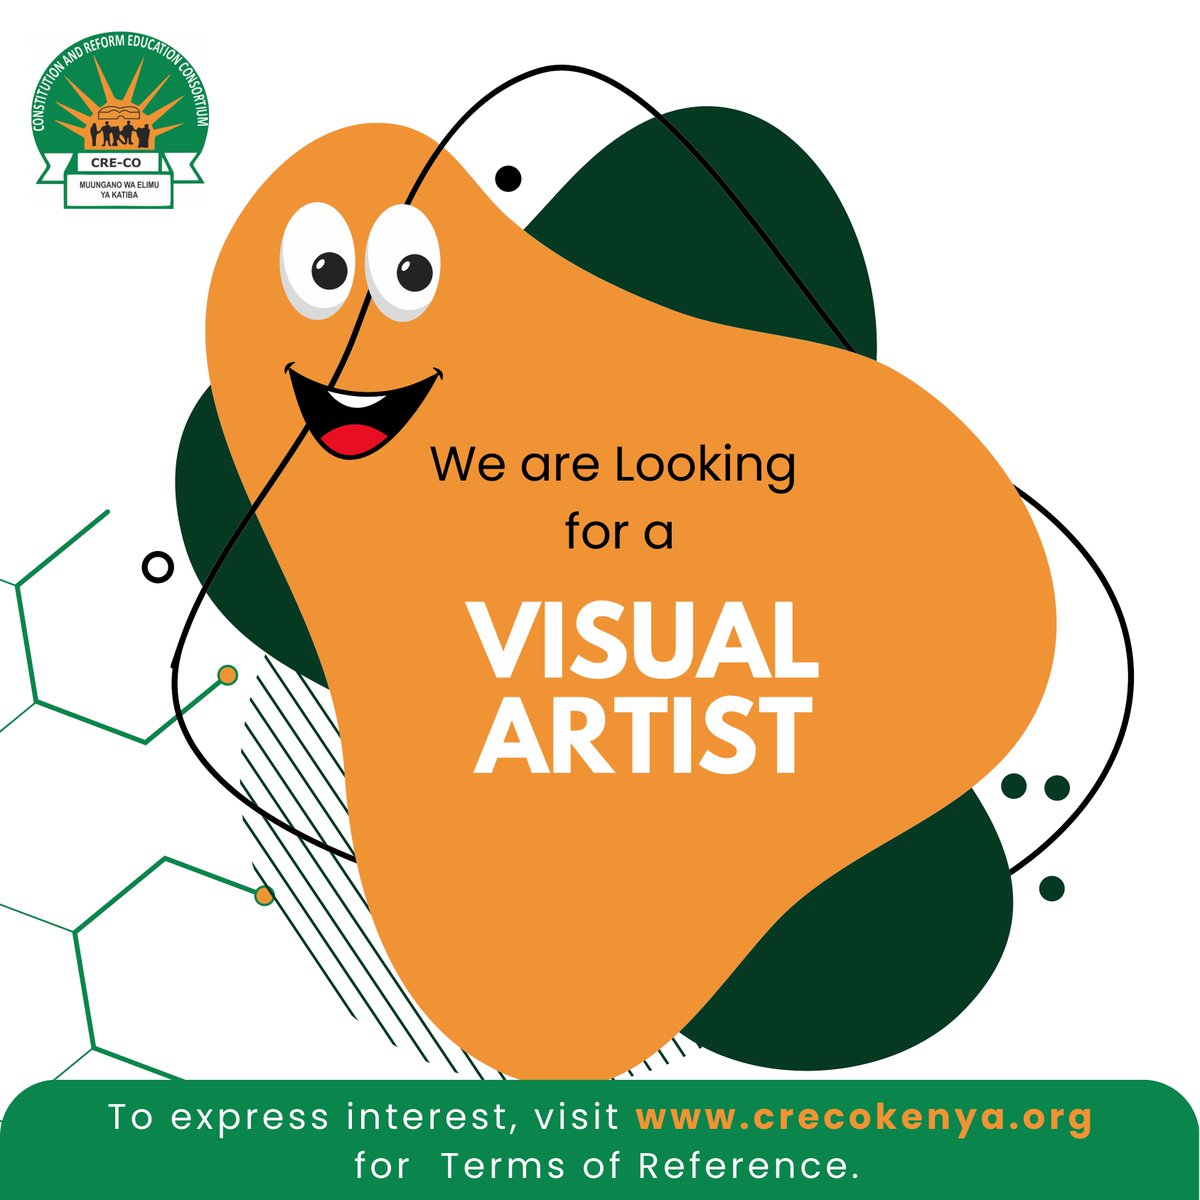 Re-advertising: Are you a Visual Artist? We are looking for you. Express interest by applying through crecokenya.org/consultancy/.